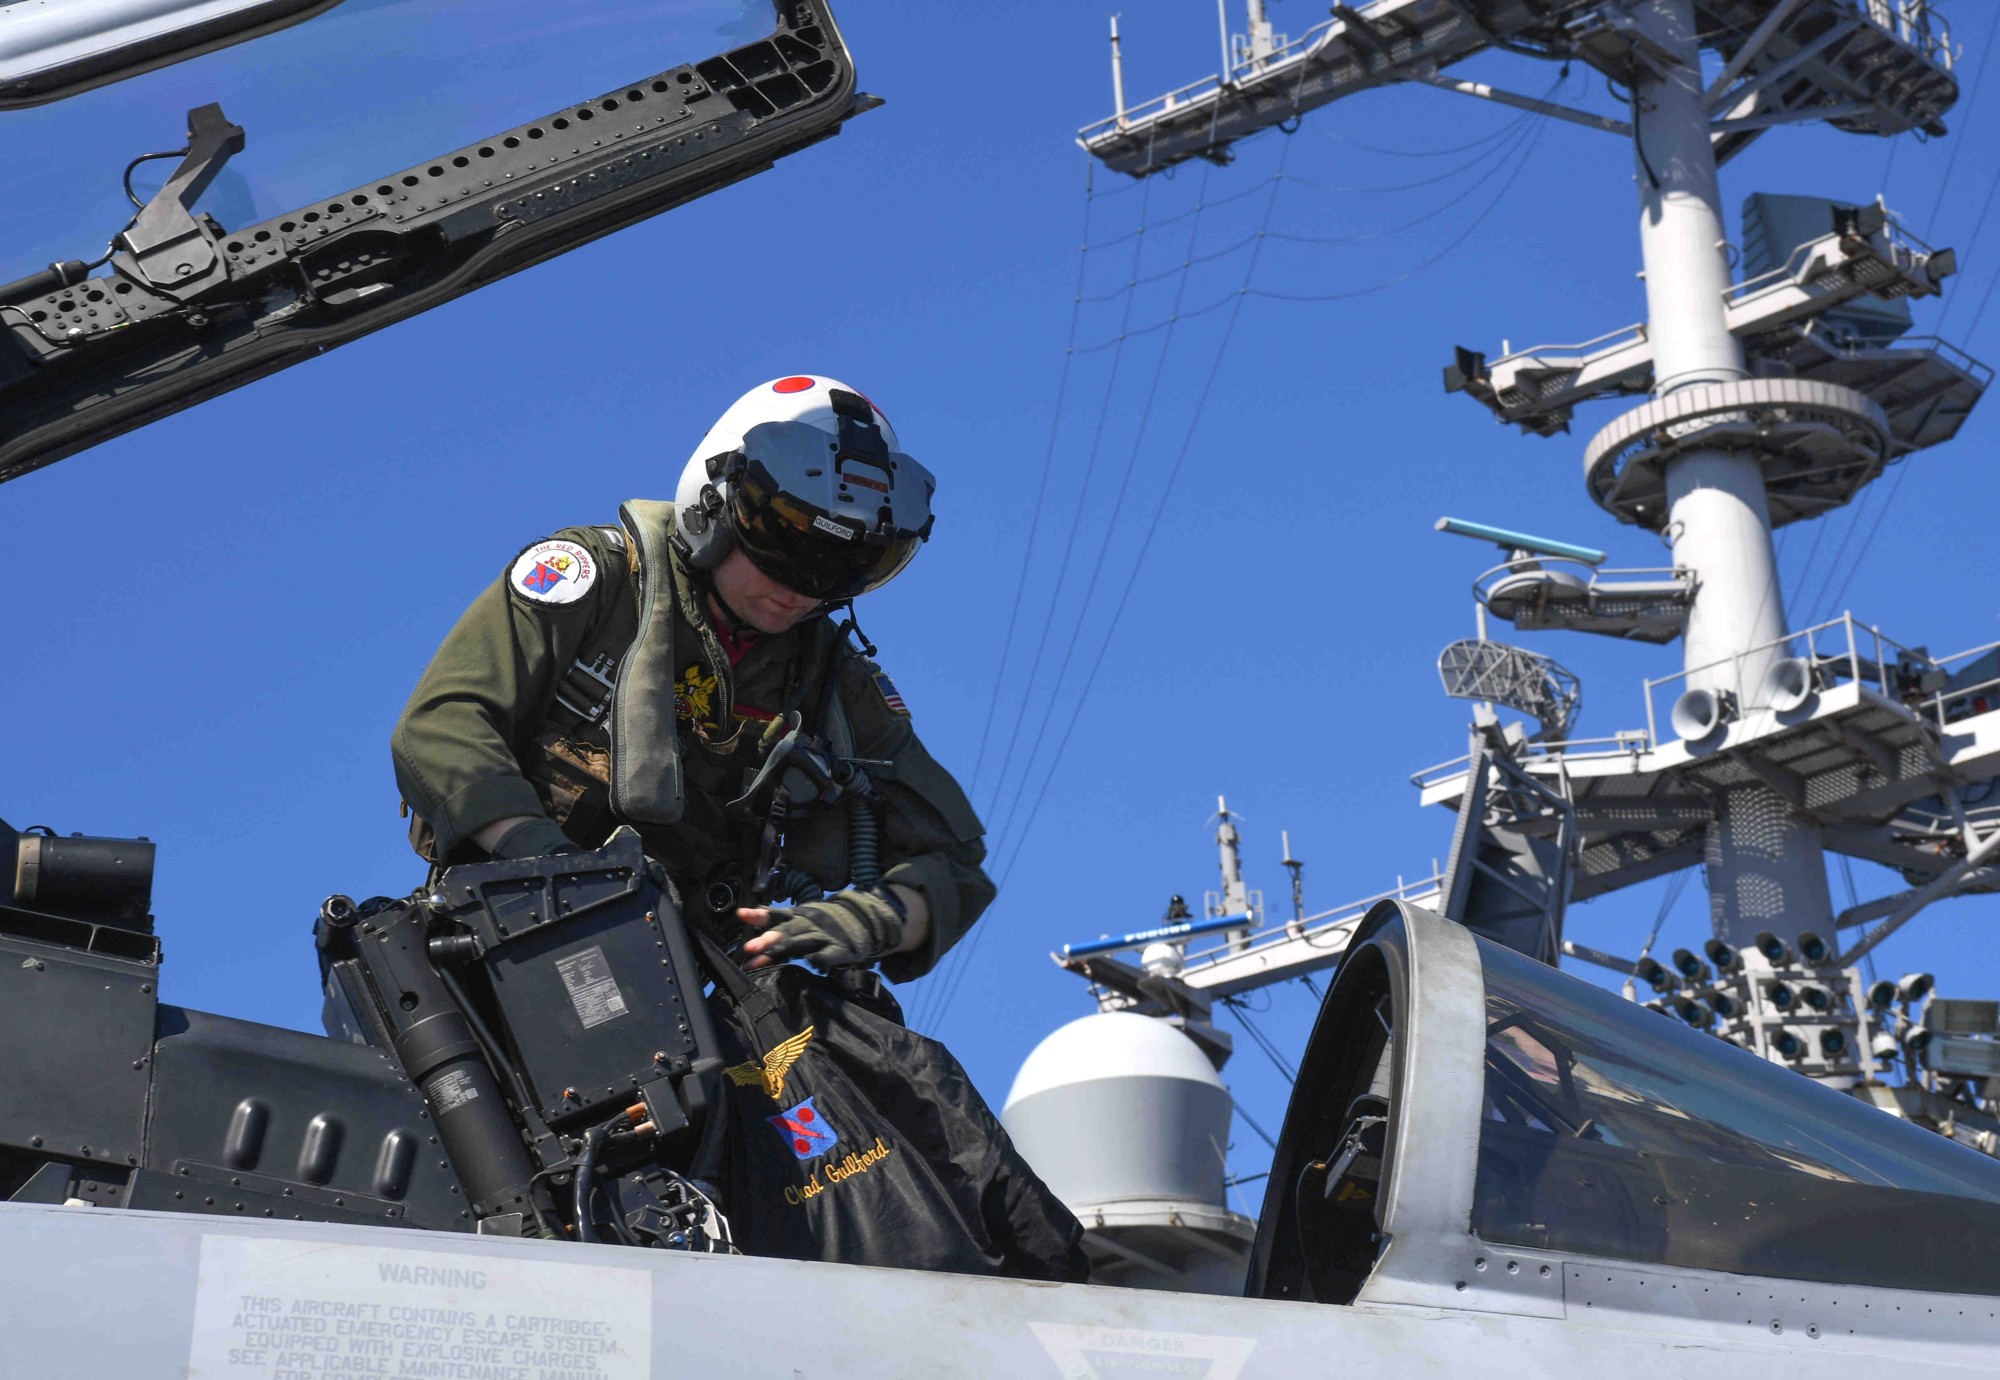 vfa-11 red rippers strike fighter squadron us navy f/a-18f super hornet carrier air wing cvw-1 uss harry s. truman cvn-75 40 ejection seat